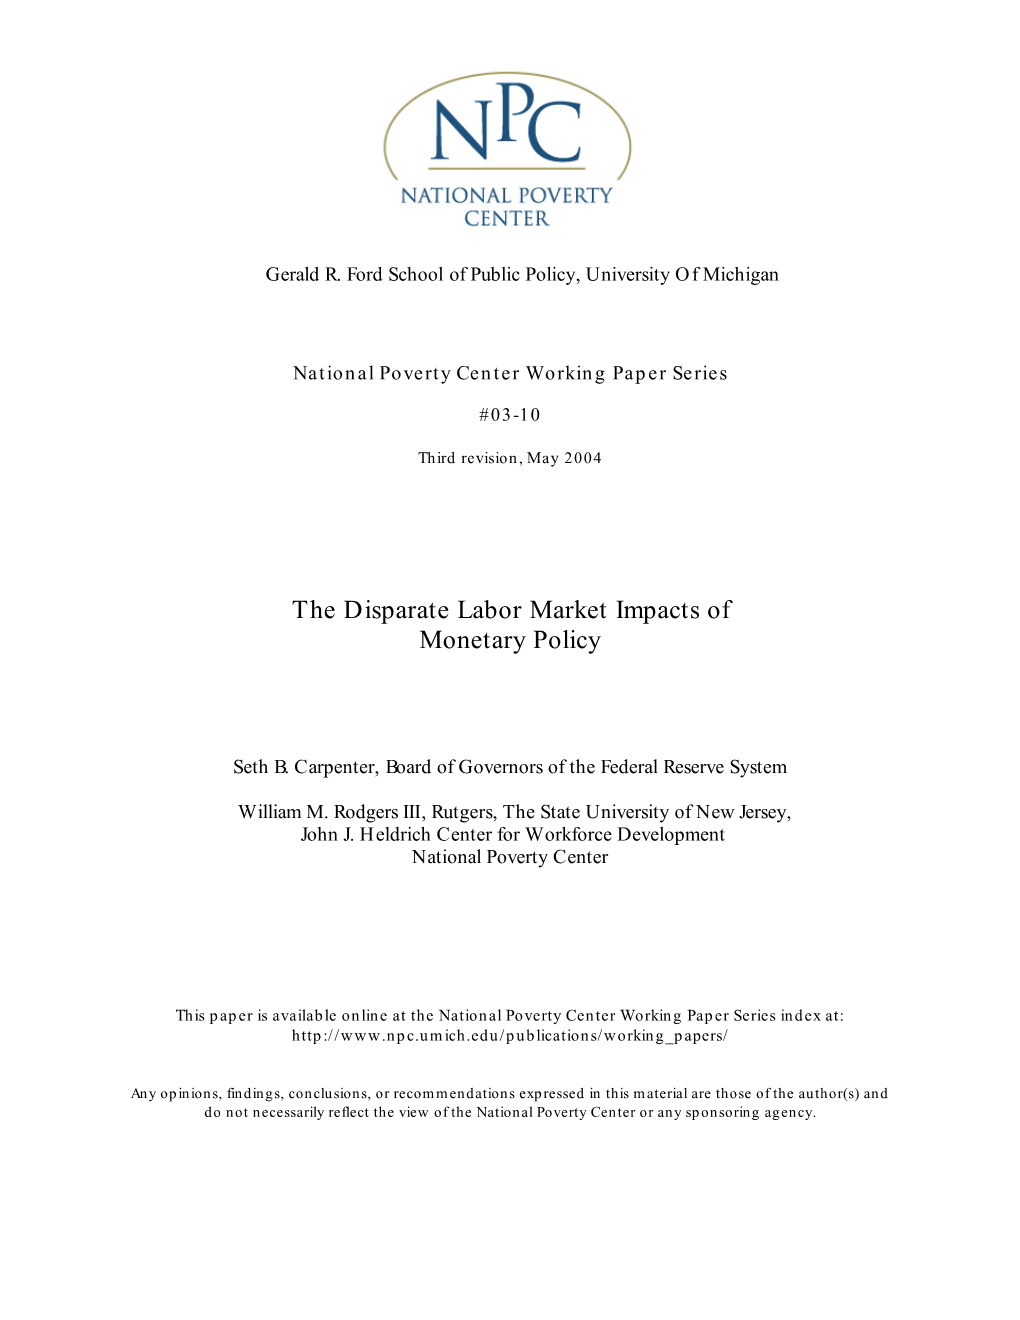 The Disparate Labor Market Impacts of Monetary Policy